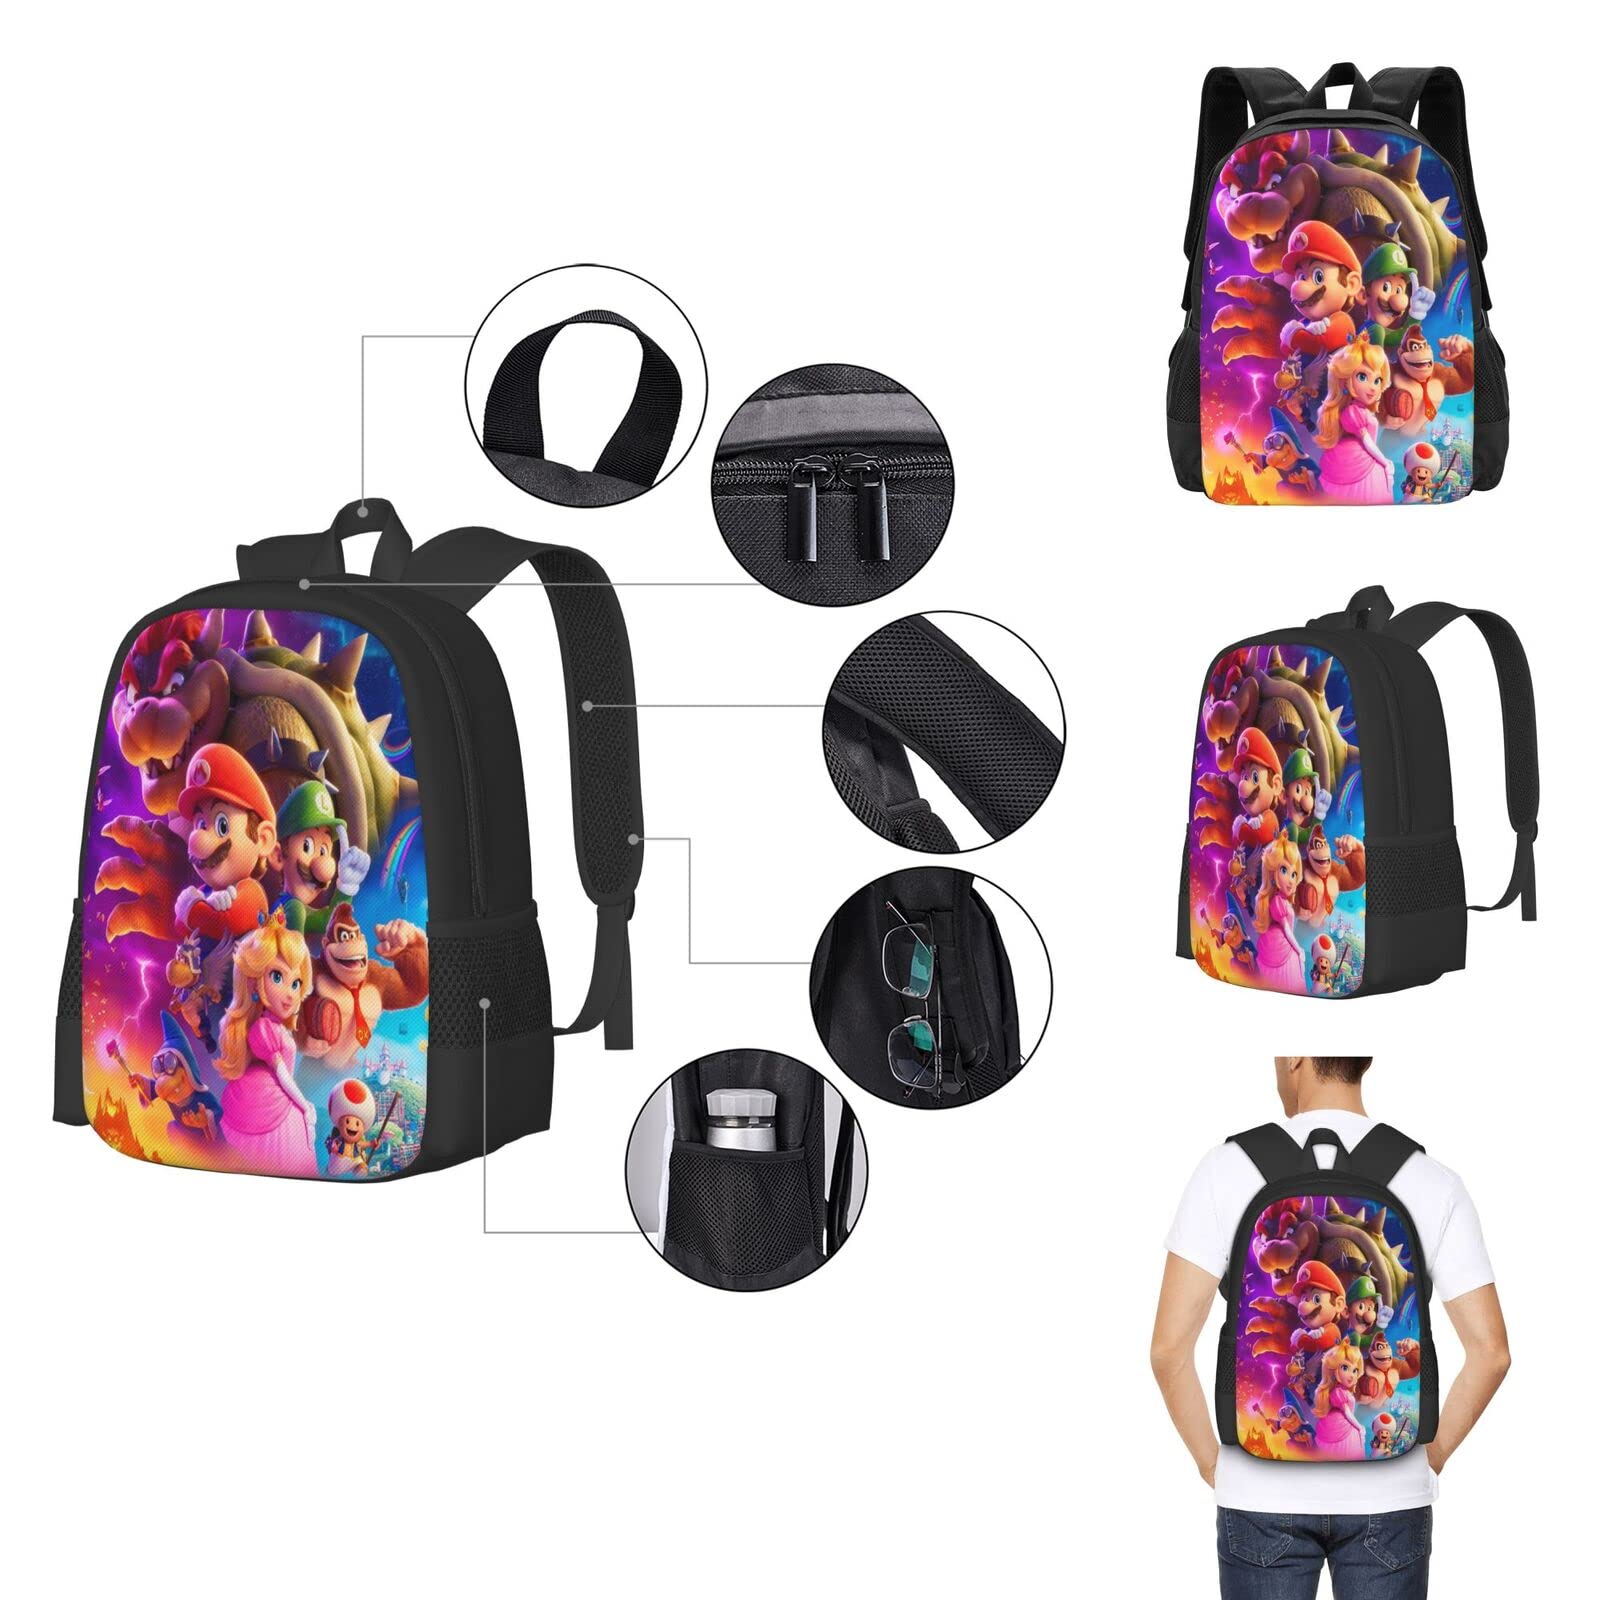 Super Cute Bros Backpacks Set 3d Casual Light Weight Backpack Bookbag 3 Pice With Lunch Box Lunch Bag And Pencil Case Pencil Bag For Girls Boys Teens